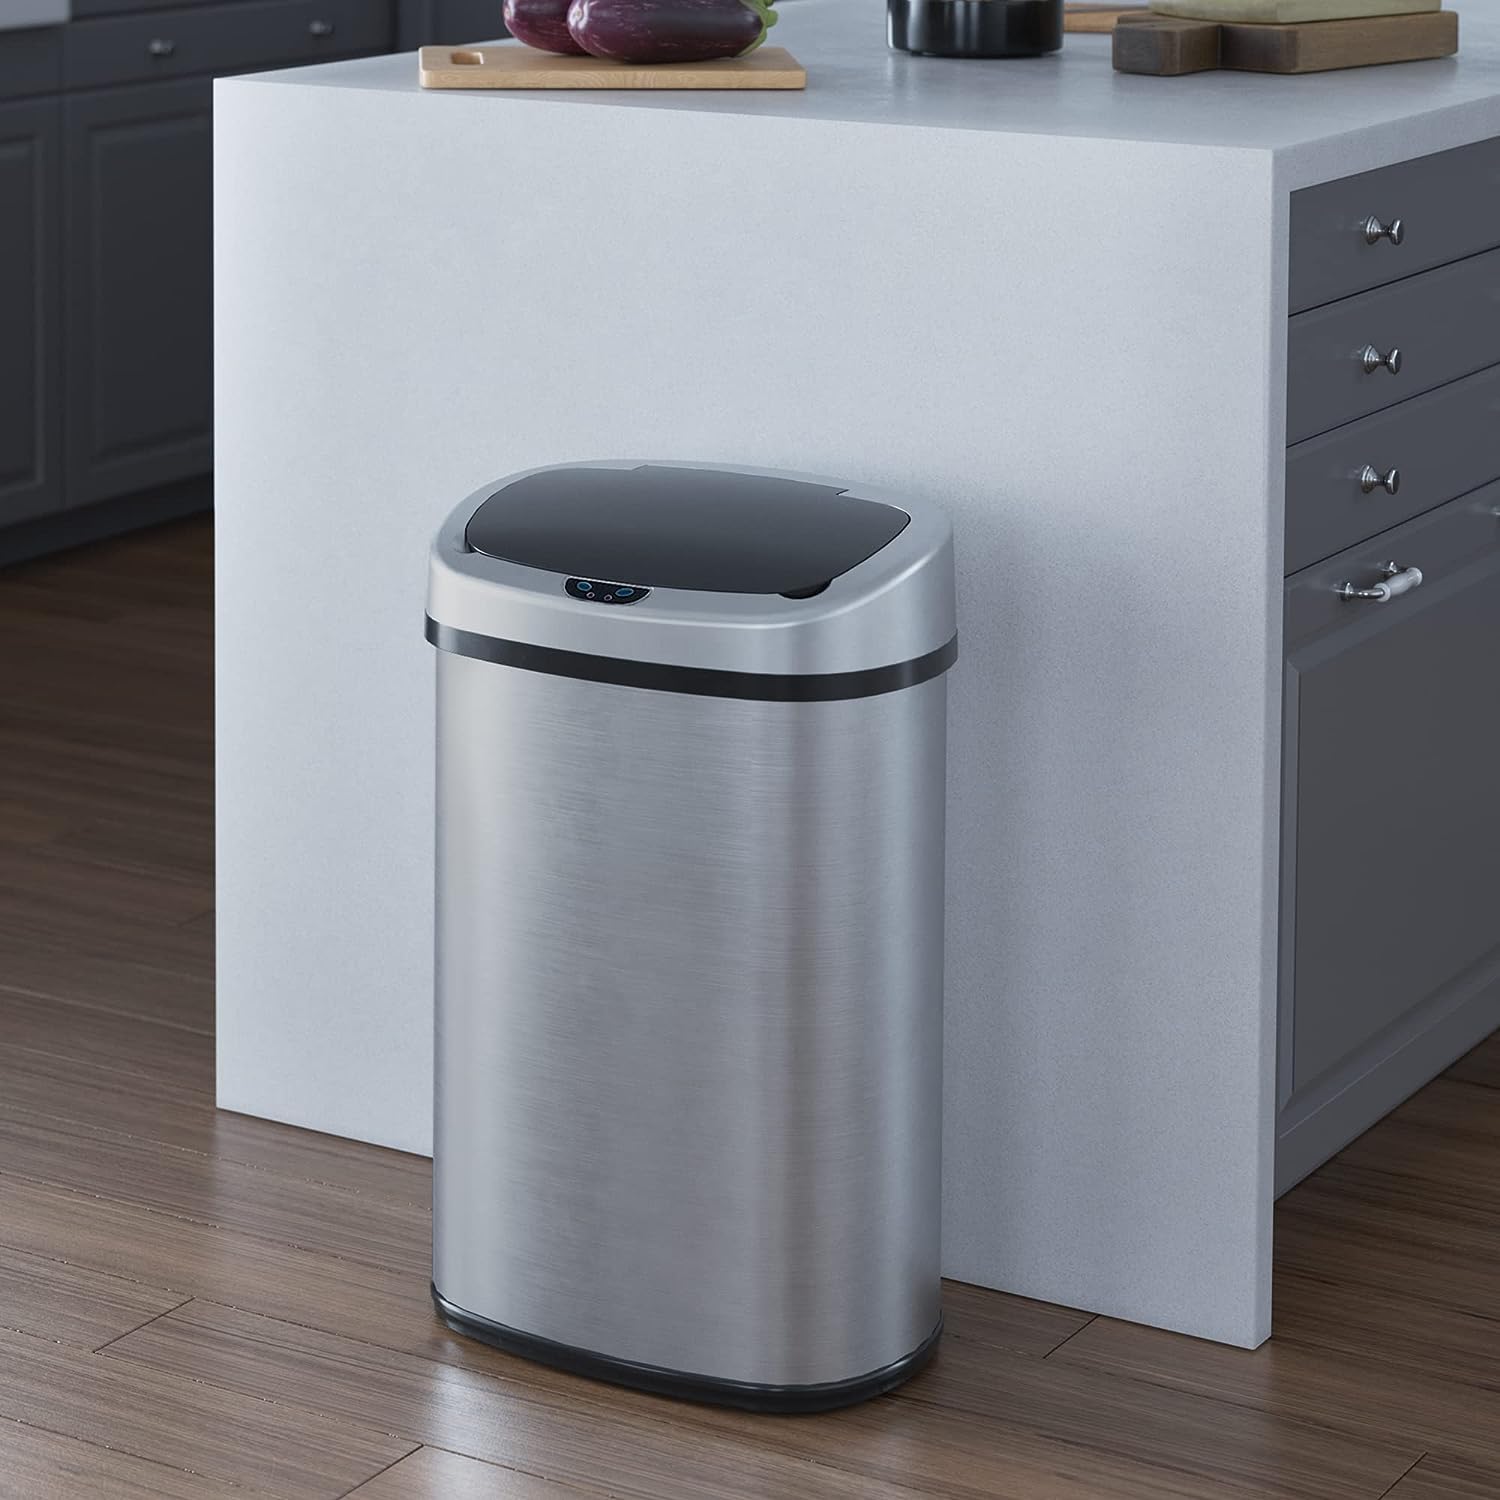 https://bigbigmart.com/wp-content/uploads/2023/10/iTouchless-13-Gallon-SensorCan-Touchless-Trash-Can-with-Odor-Control-System-Stainless-Steel-Oval-Shape-Kitchen-Bin4.jpg